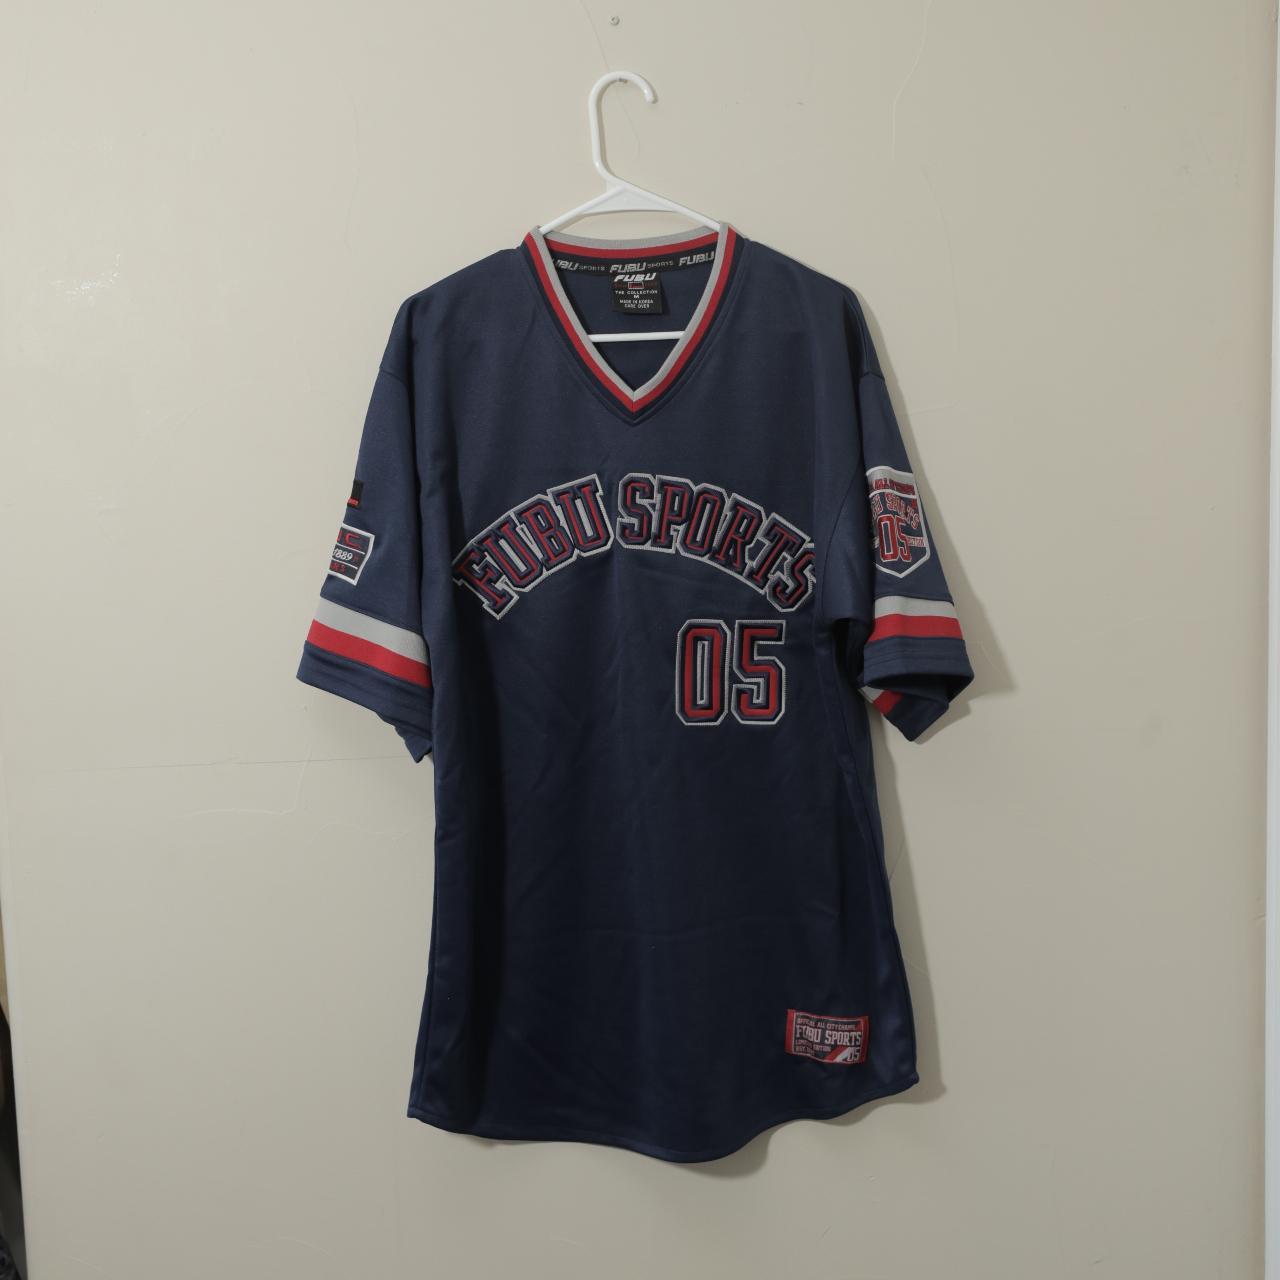 FUBU Limited Edition Jersey - The Collection... - Depop